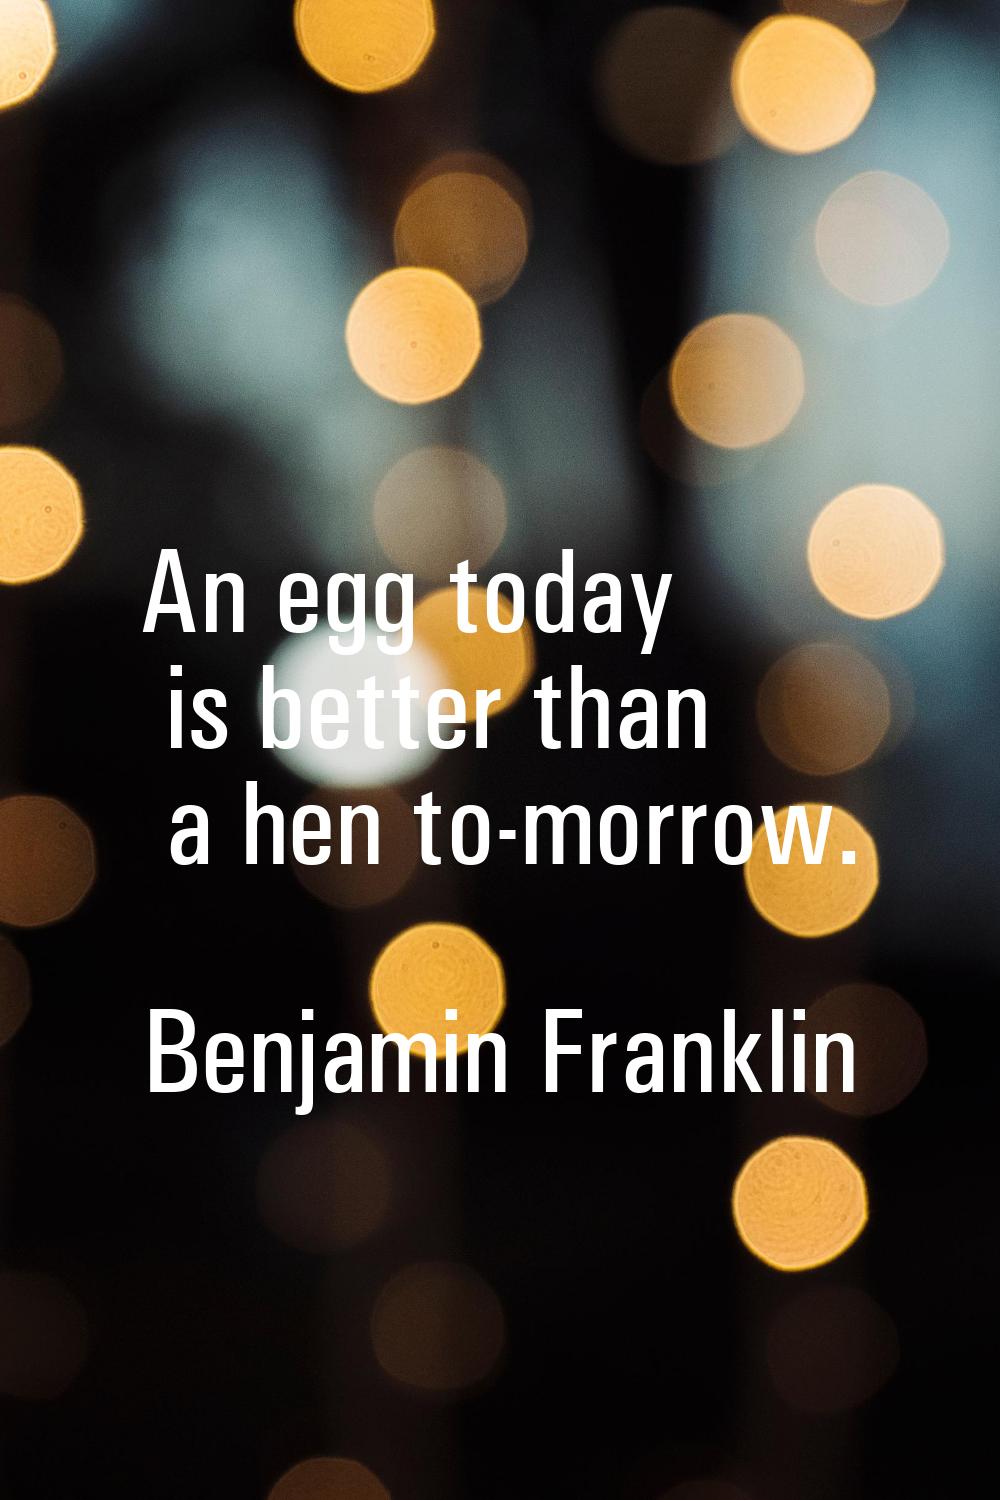 An egg today is better than a hen to-morrow.